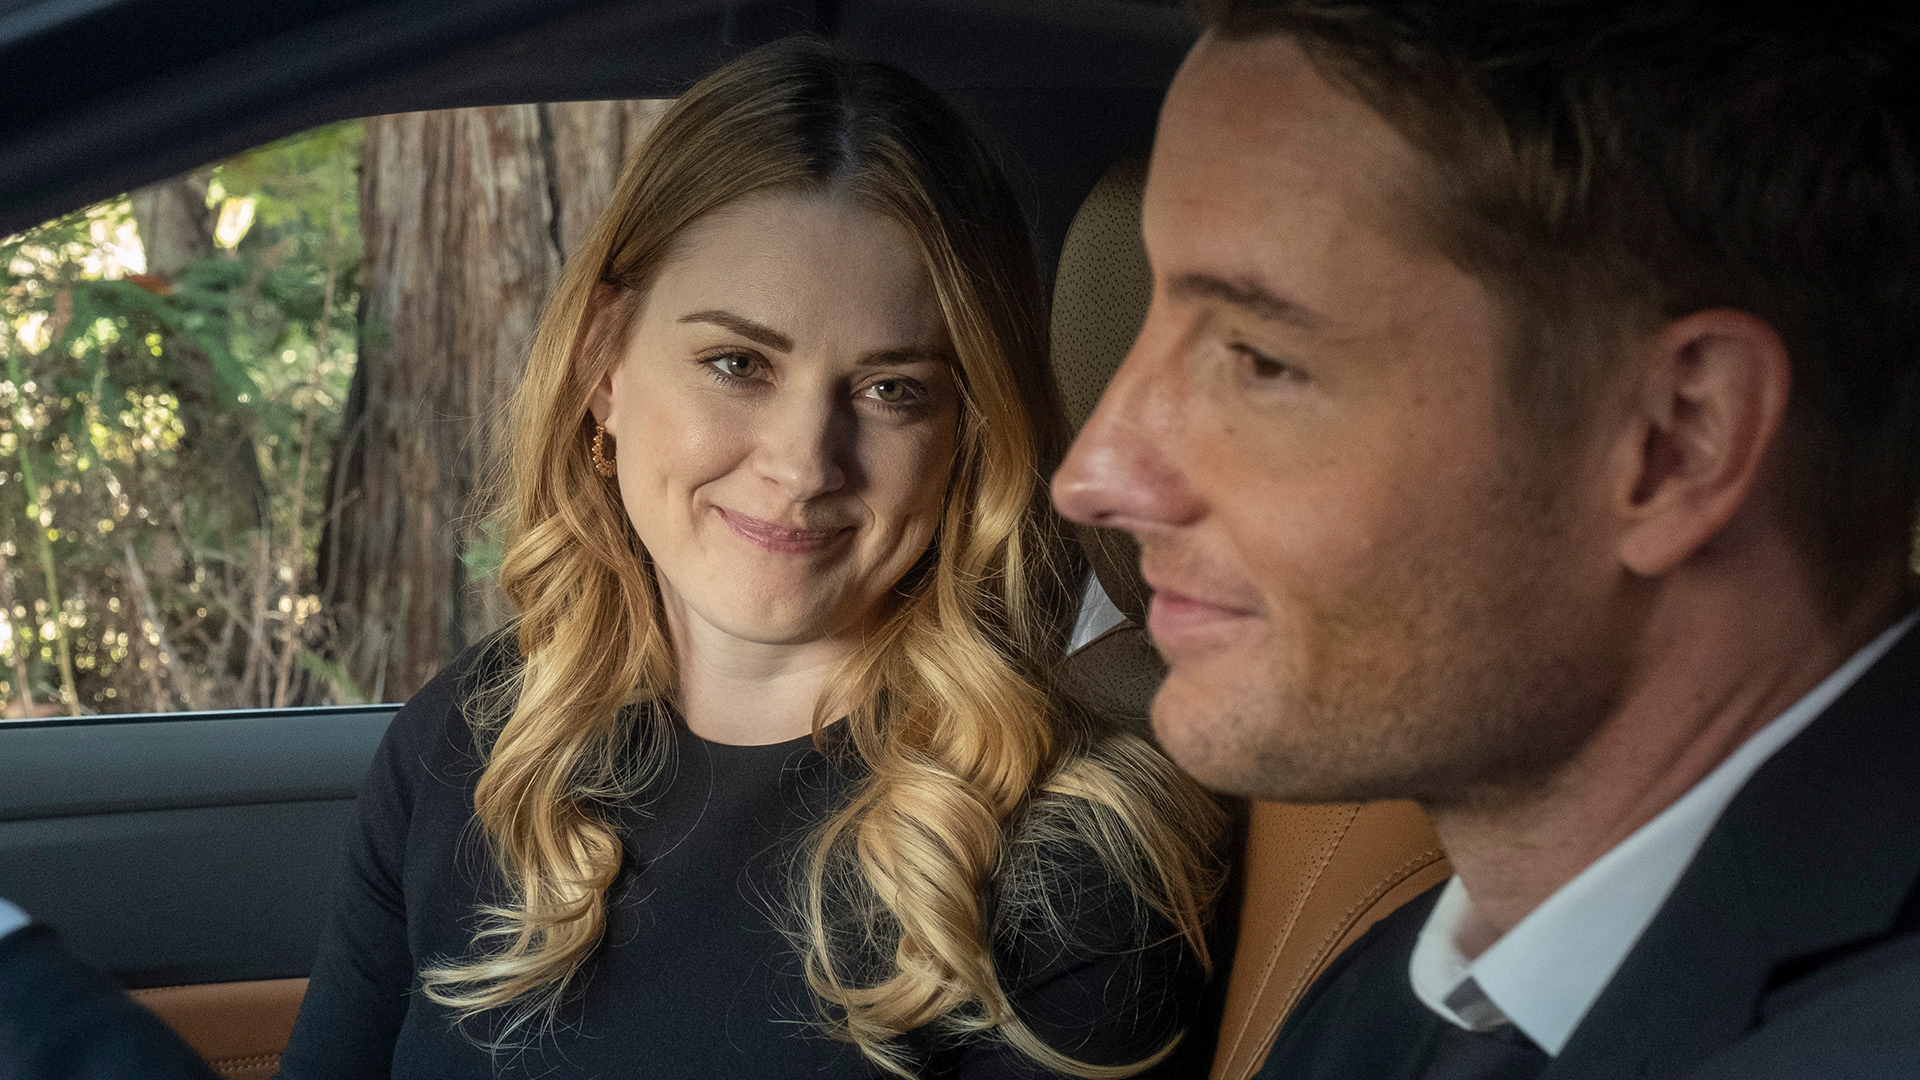 Alexandra Breckenridge as Sophie and Justin Hartley as Kevin sit in a car together in ‘This Is Us’ Season 4 Episode 12